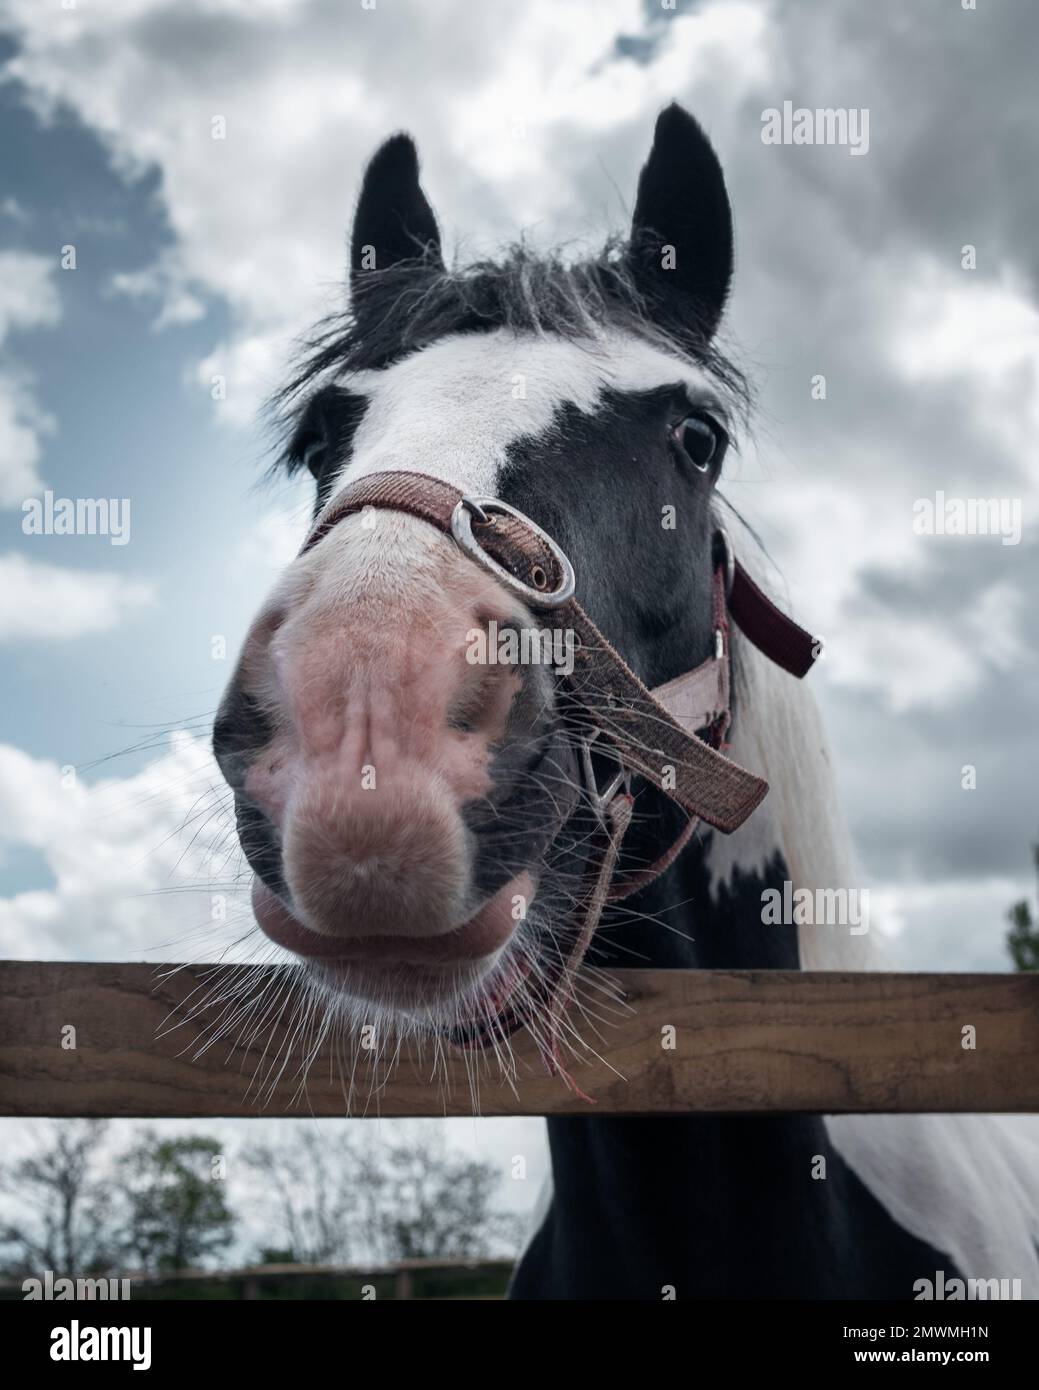 A vertical shot of a black-white horse against a cloudy sky Stock Photo